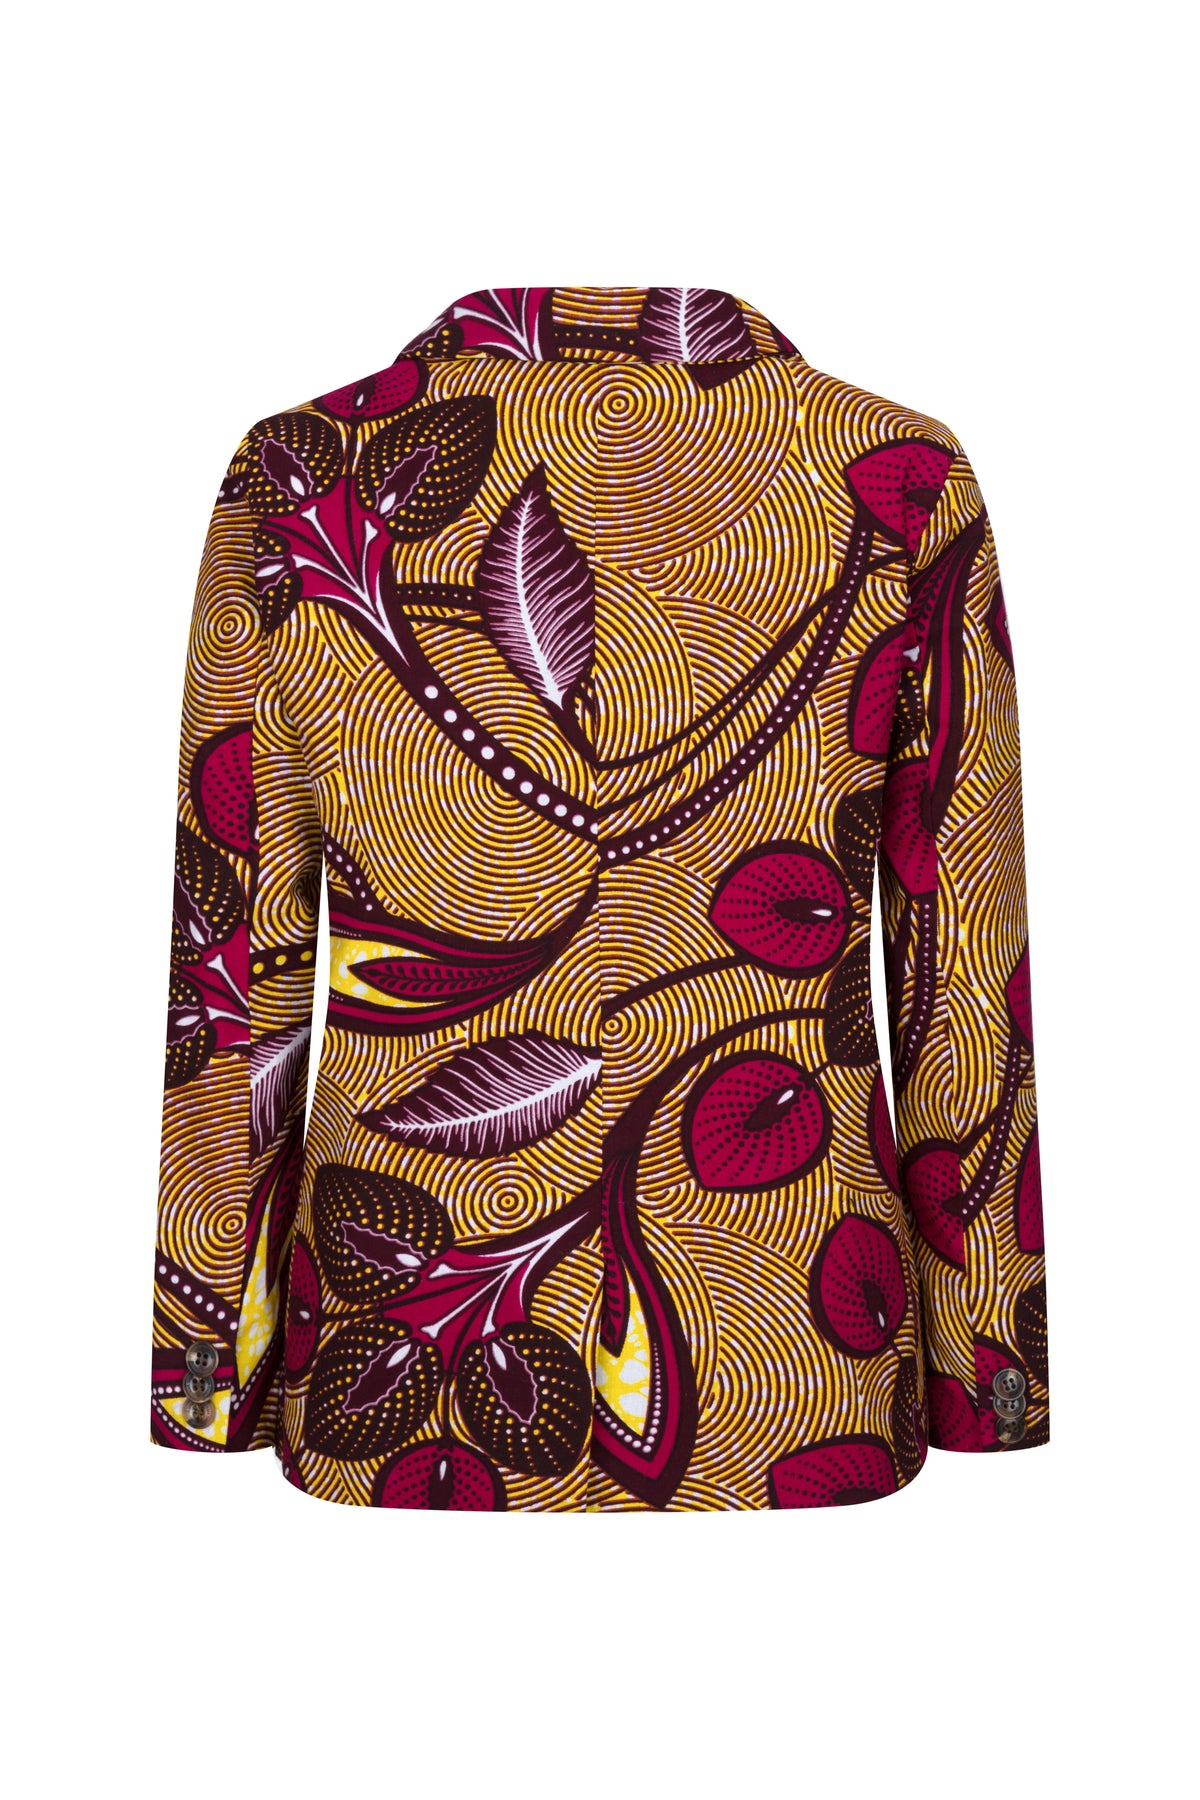 Kids Unisex Suit Set- 'Wine Floral' - OHEMA OHENE AFRICAN INSPIRED FASHION